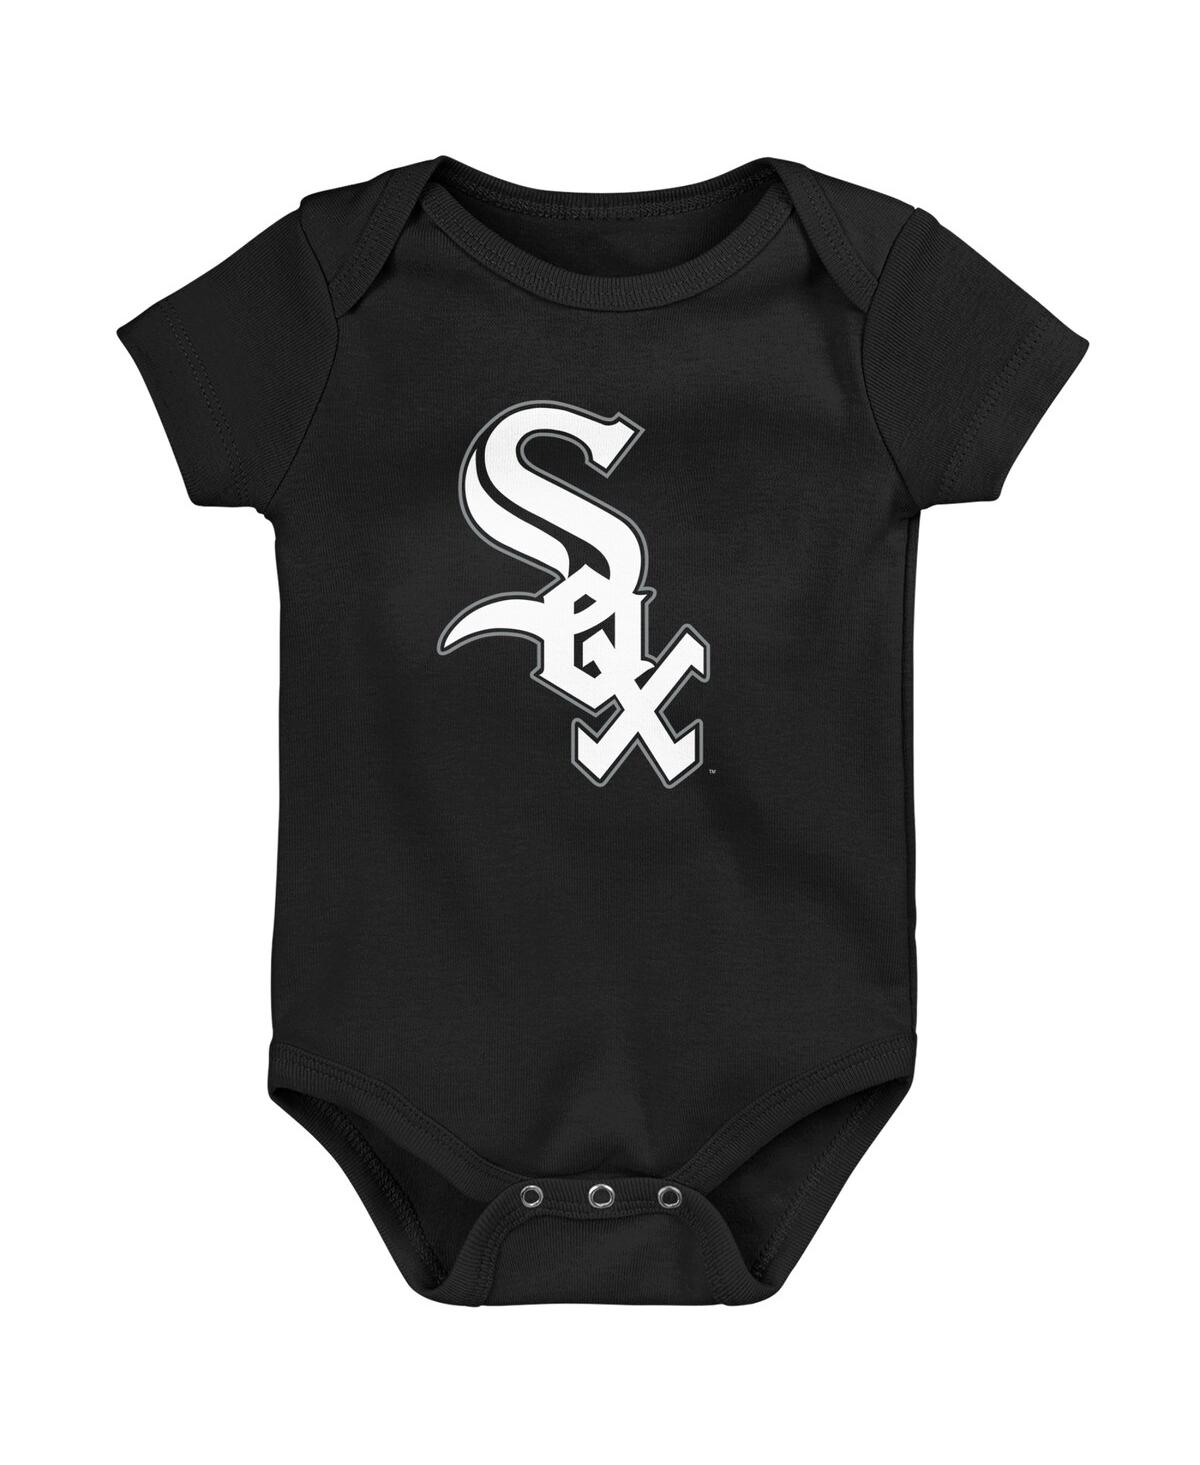 Outerstuff Babies' Newborn And Infant Boys And Girls Black Chicago White Sox Primary Team Logo Bodysuit